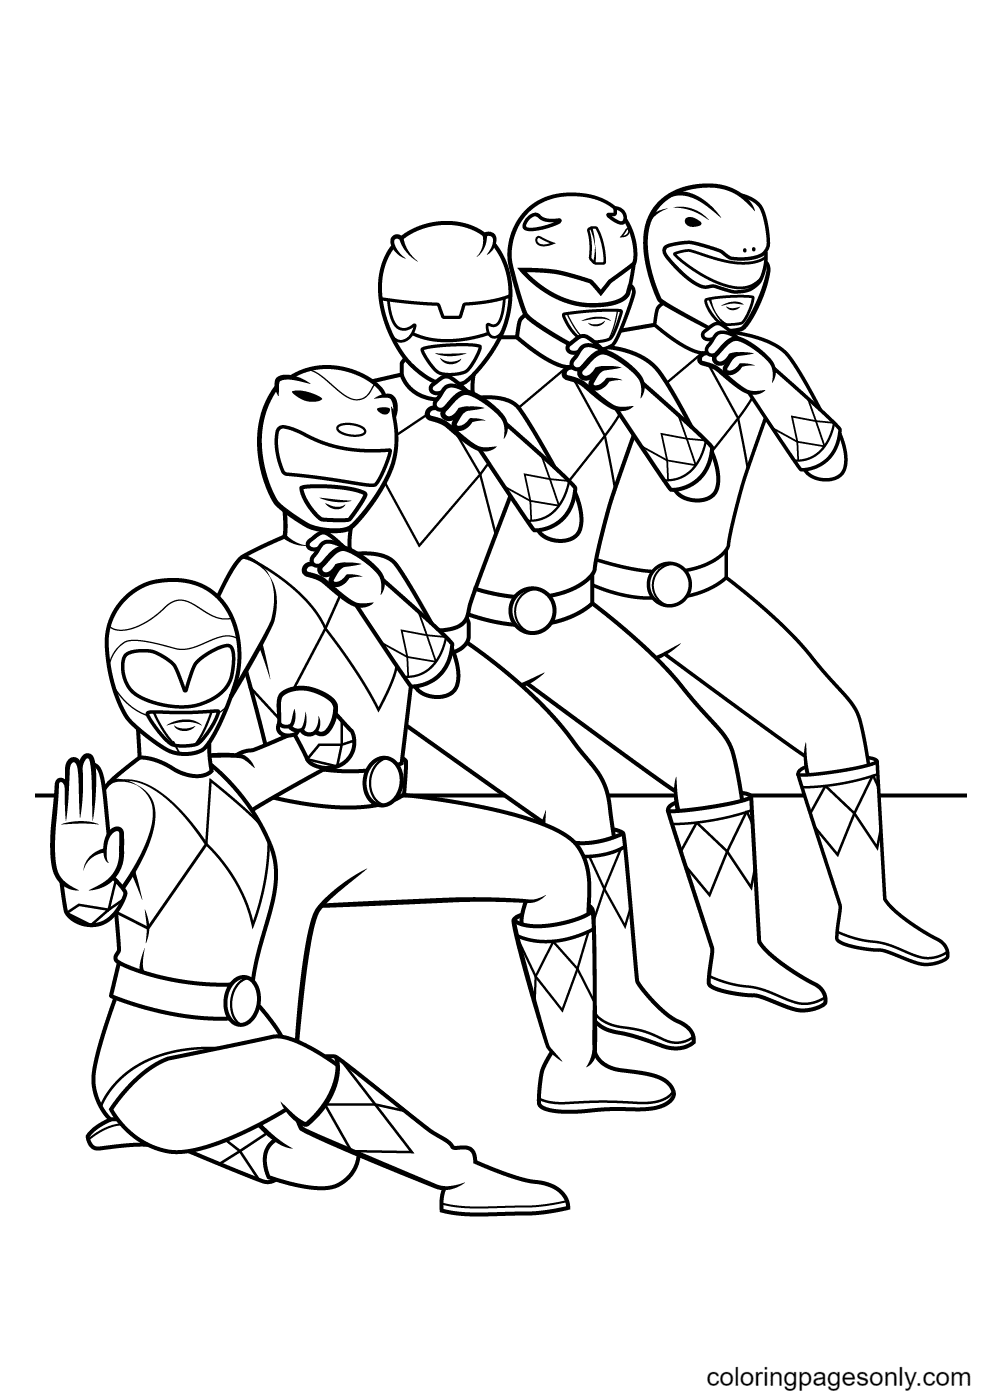 Power rangers team coloring page